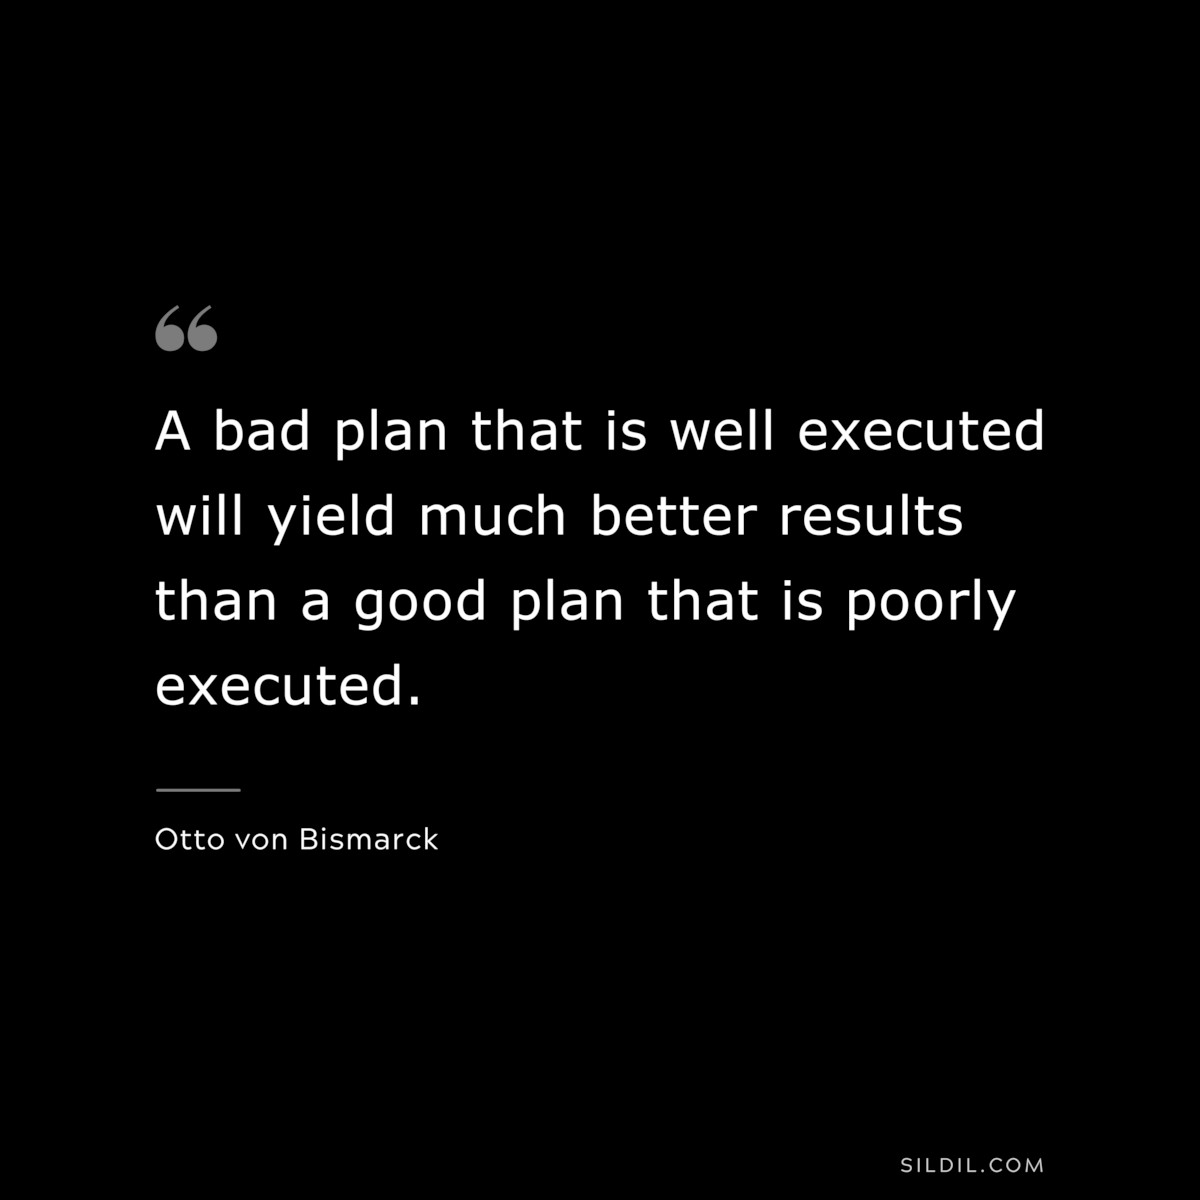 A bad plan that is well executed will yield much better results than a good plan that is poorly executed. ― Otto von Bismarck